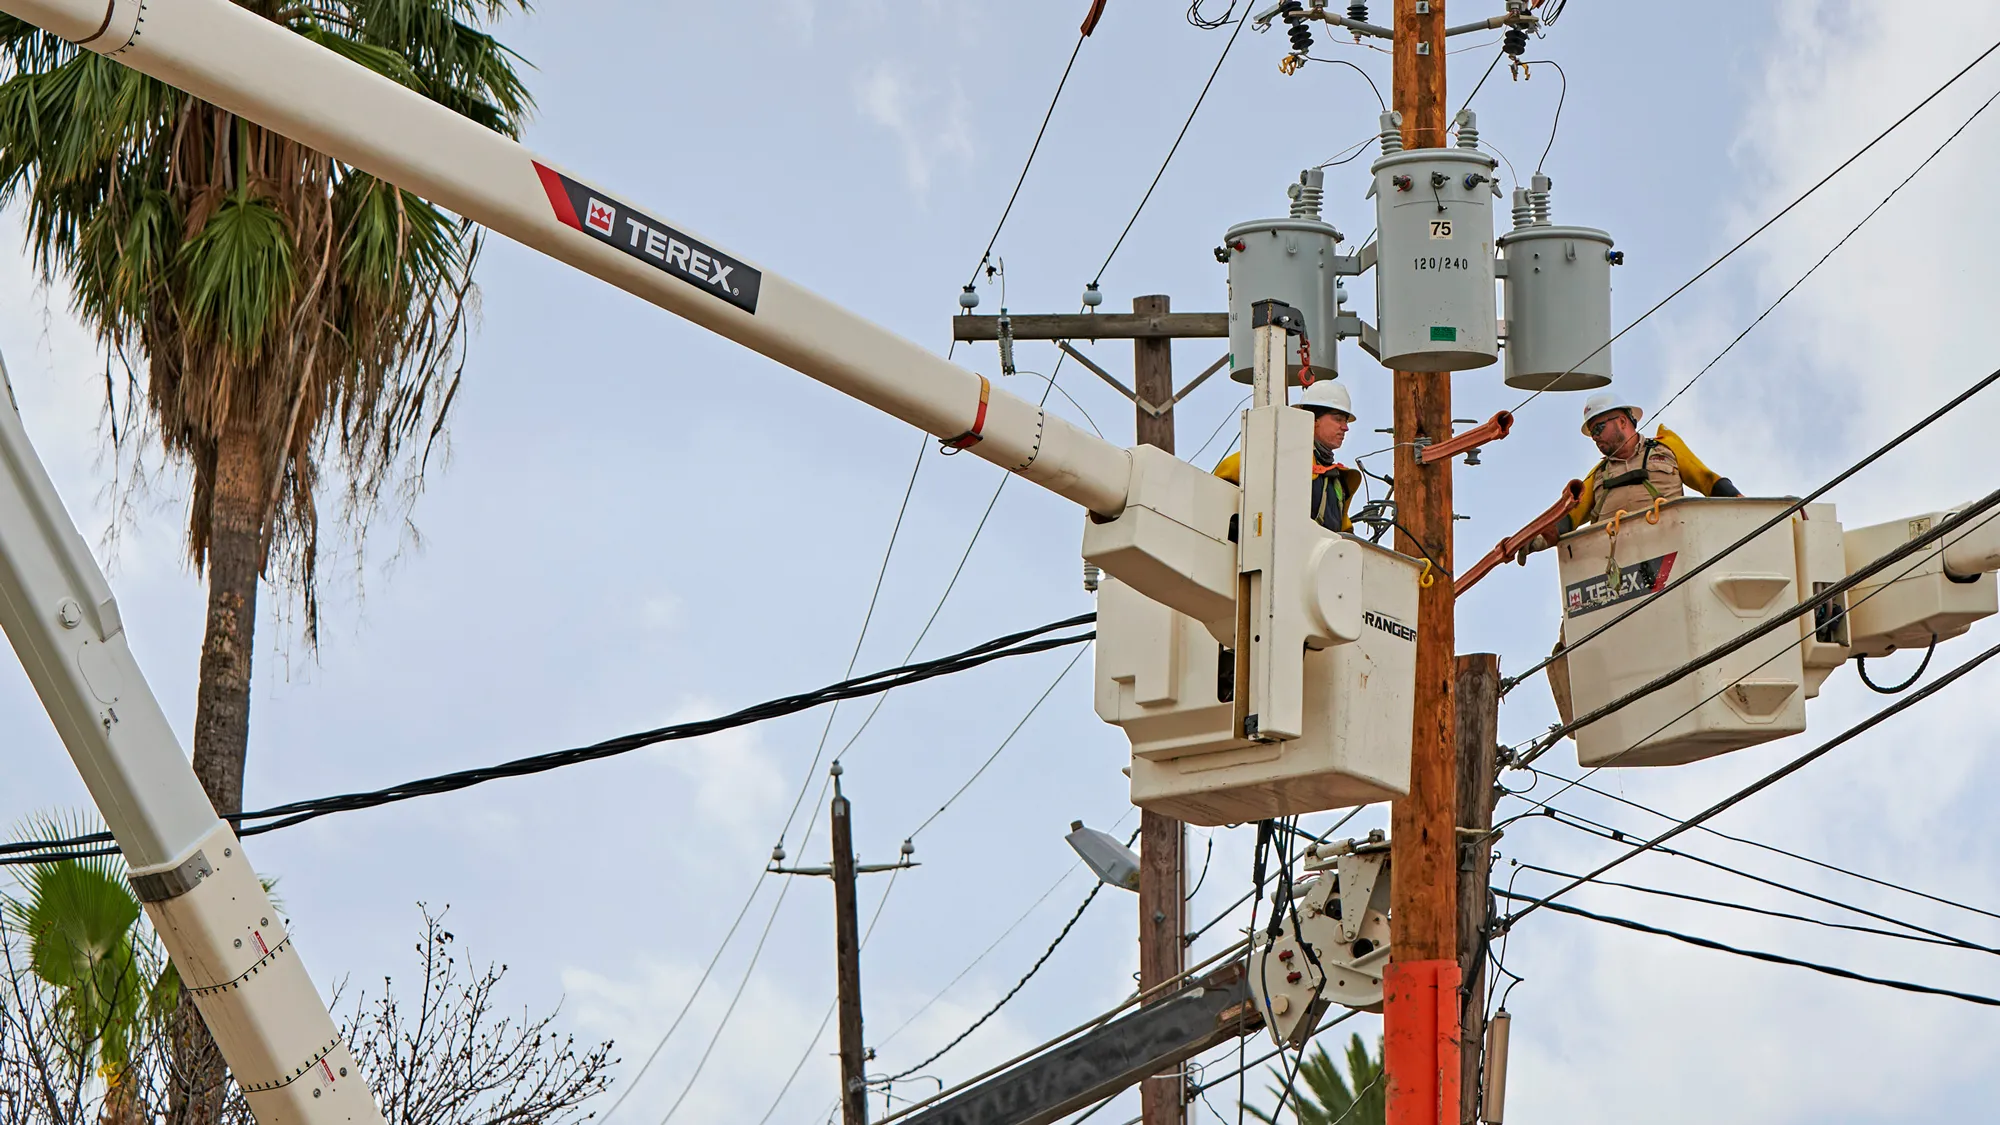 A Linetec Employee works on power lines in Laredo, Texas